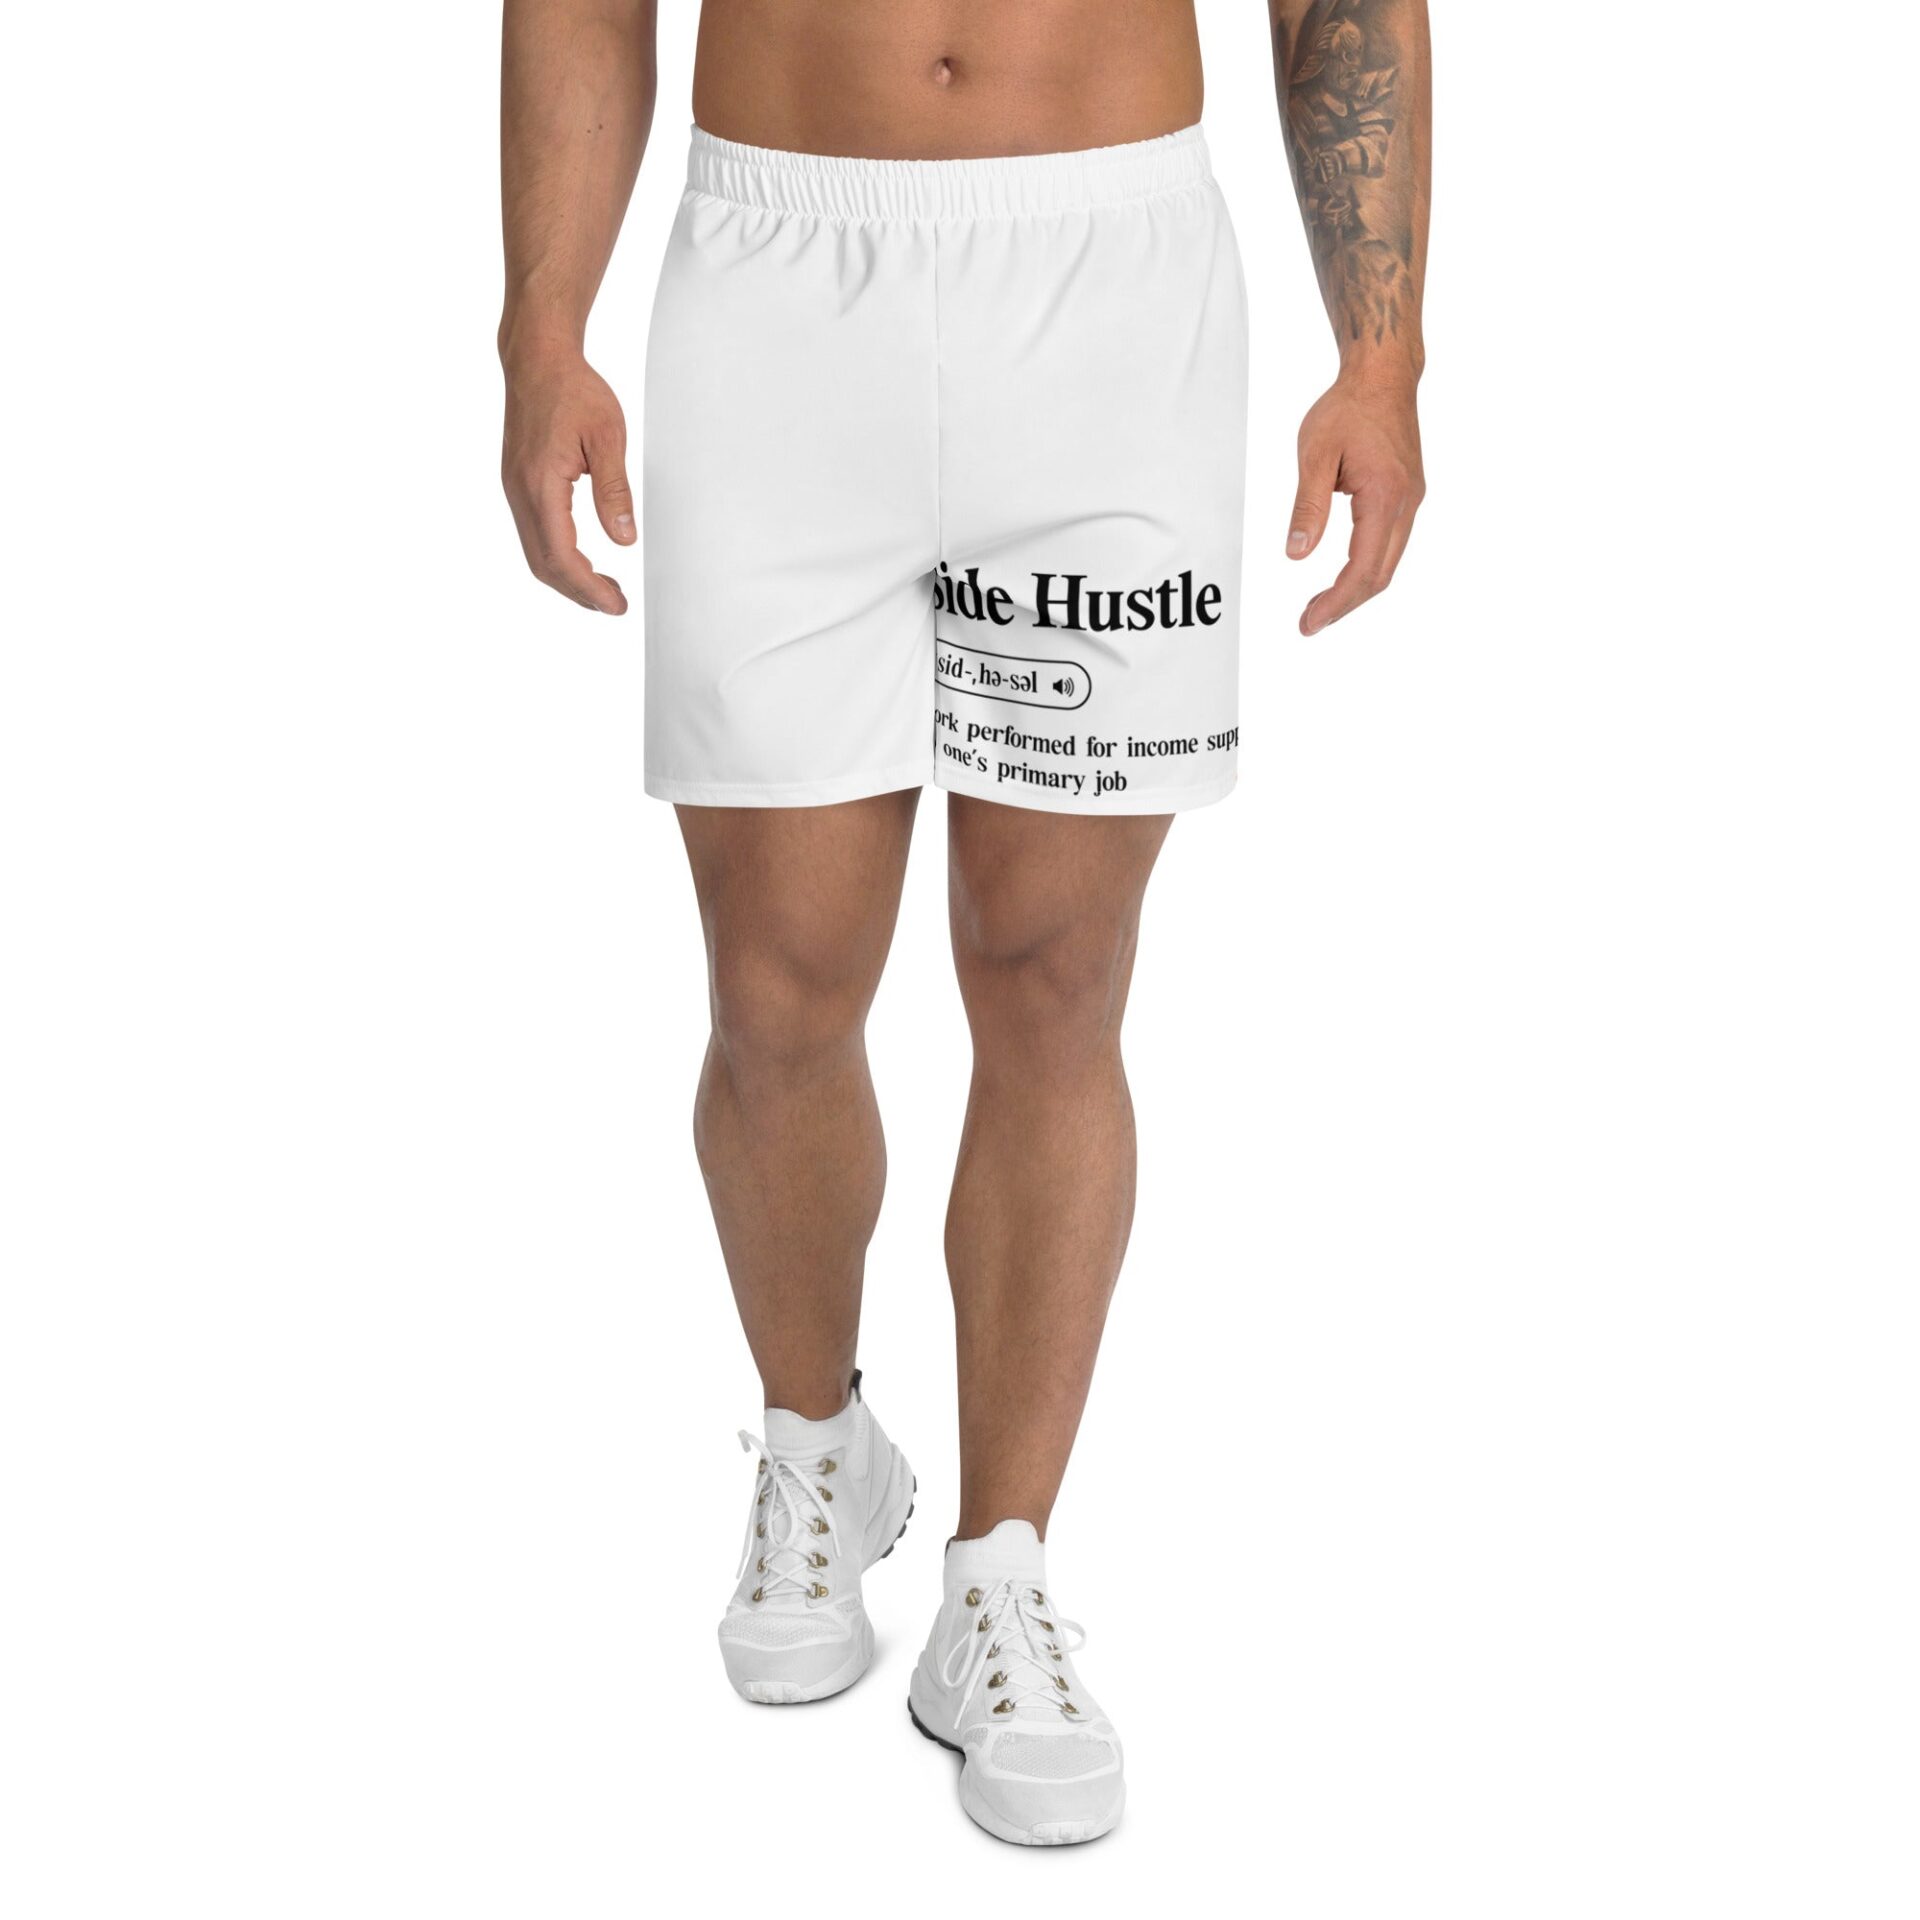 all-over-print-mens-recycled-athletic-shorts-white-front-645e749babe7a.jpg